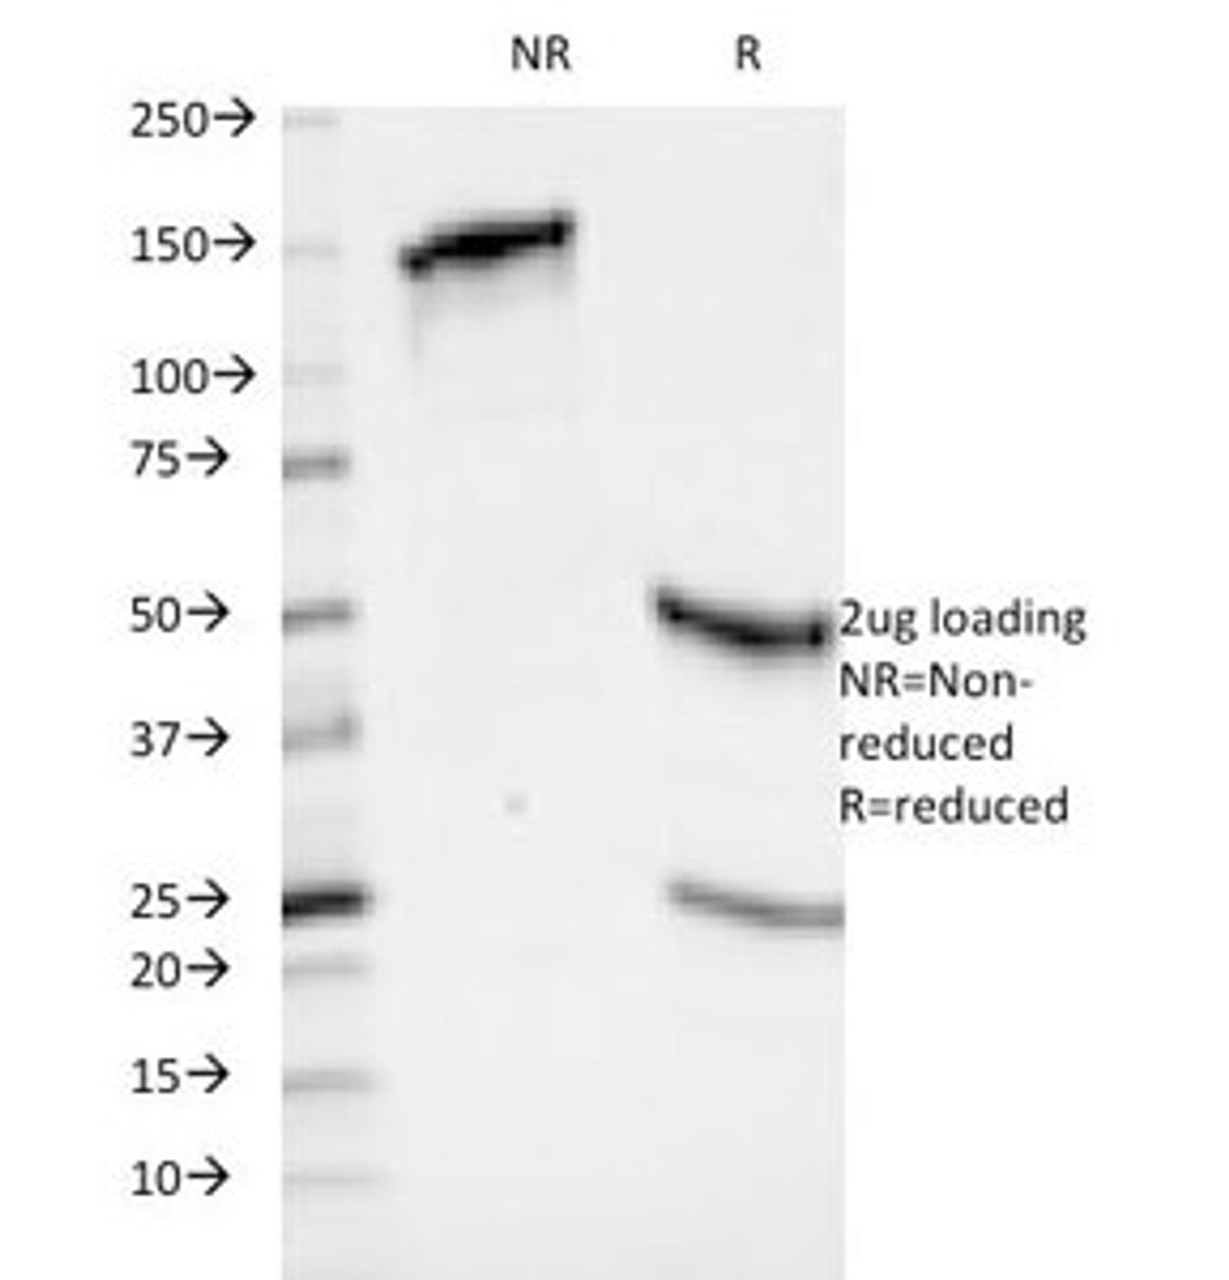 SDS-PAGE Analysis of Purified, BSA-Free HLA-ABC Antibody (clone 246-B8.E7) . Confirmation of Integrity and Purity of the Antibody.